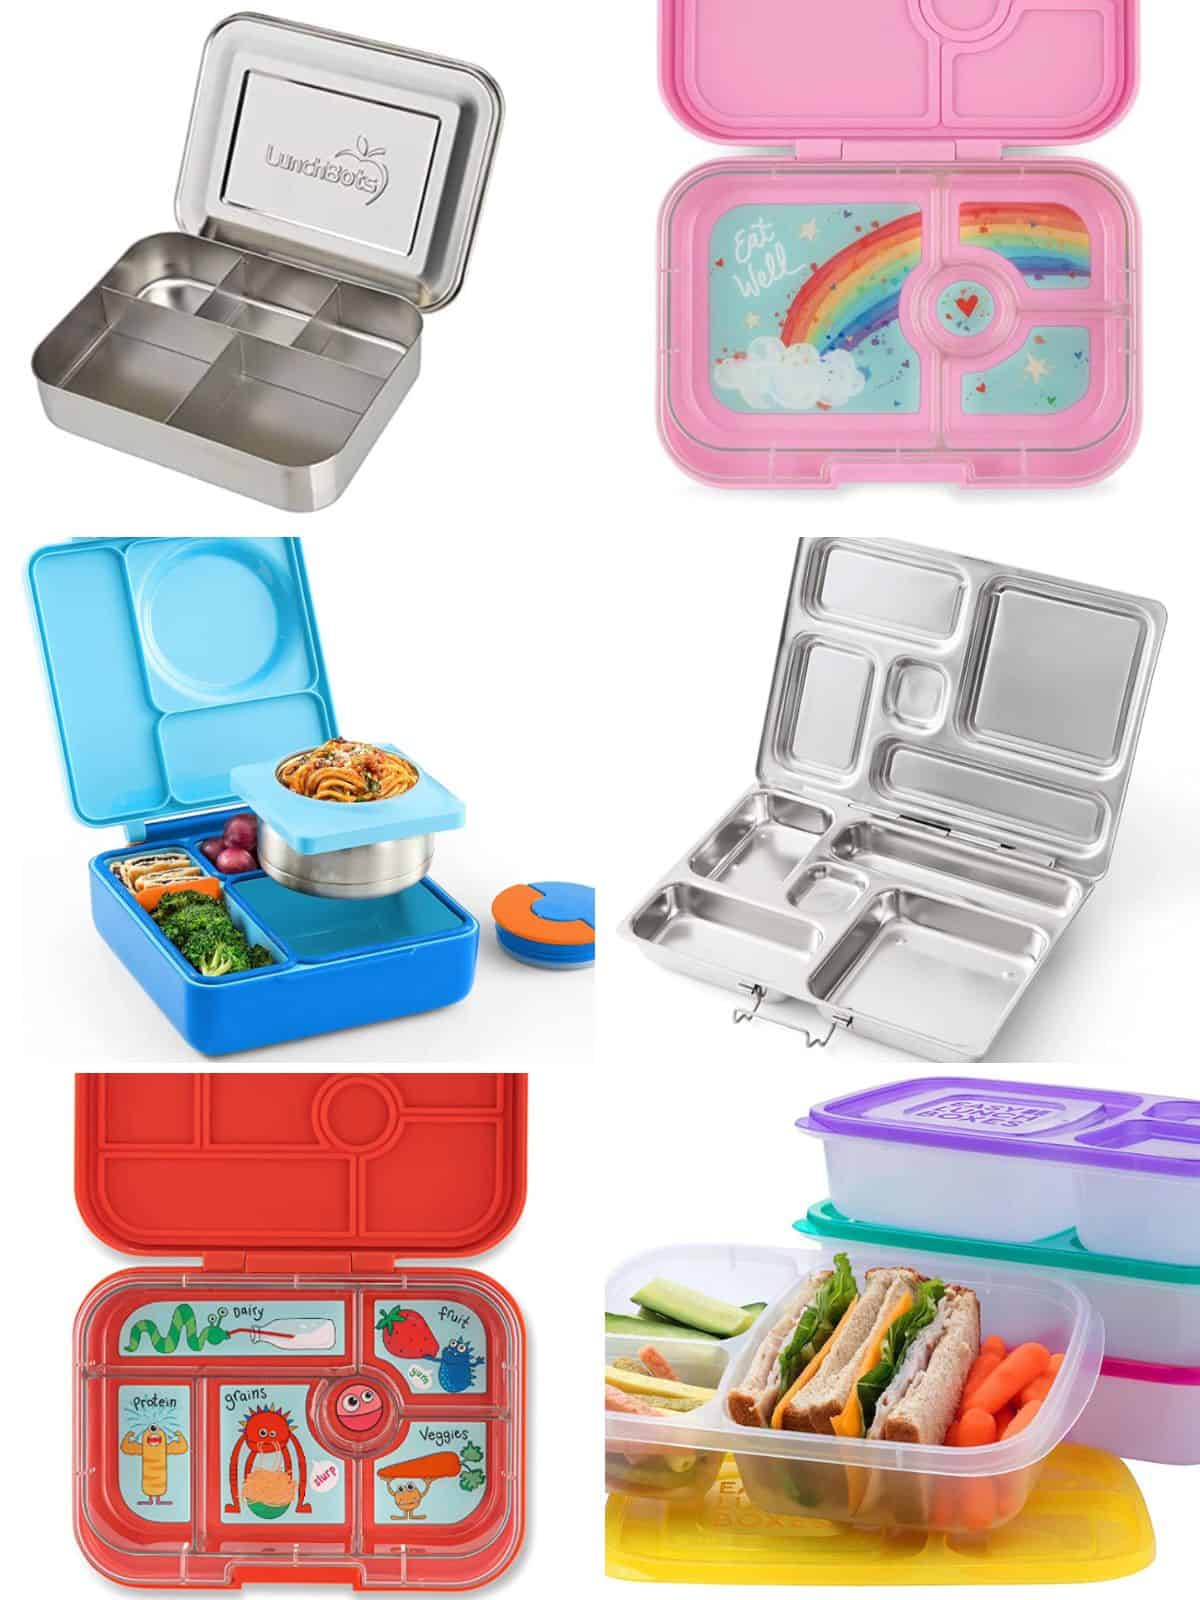 https://www.mjandhungryman.com/wp-content/uploads/2022/07/Lunch-Boxes-for-toddlers-and-kids.jpg